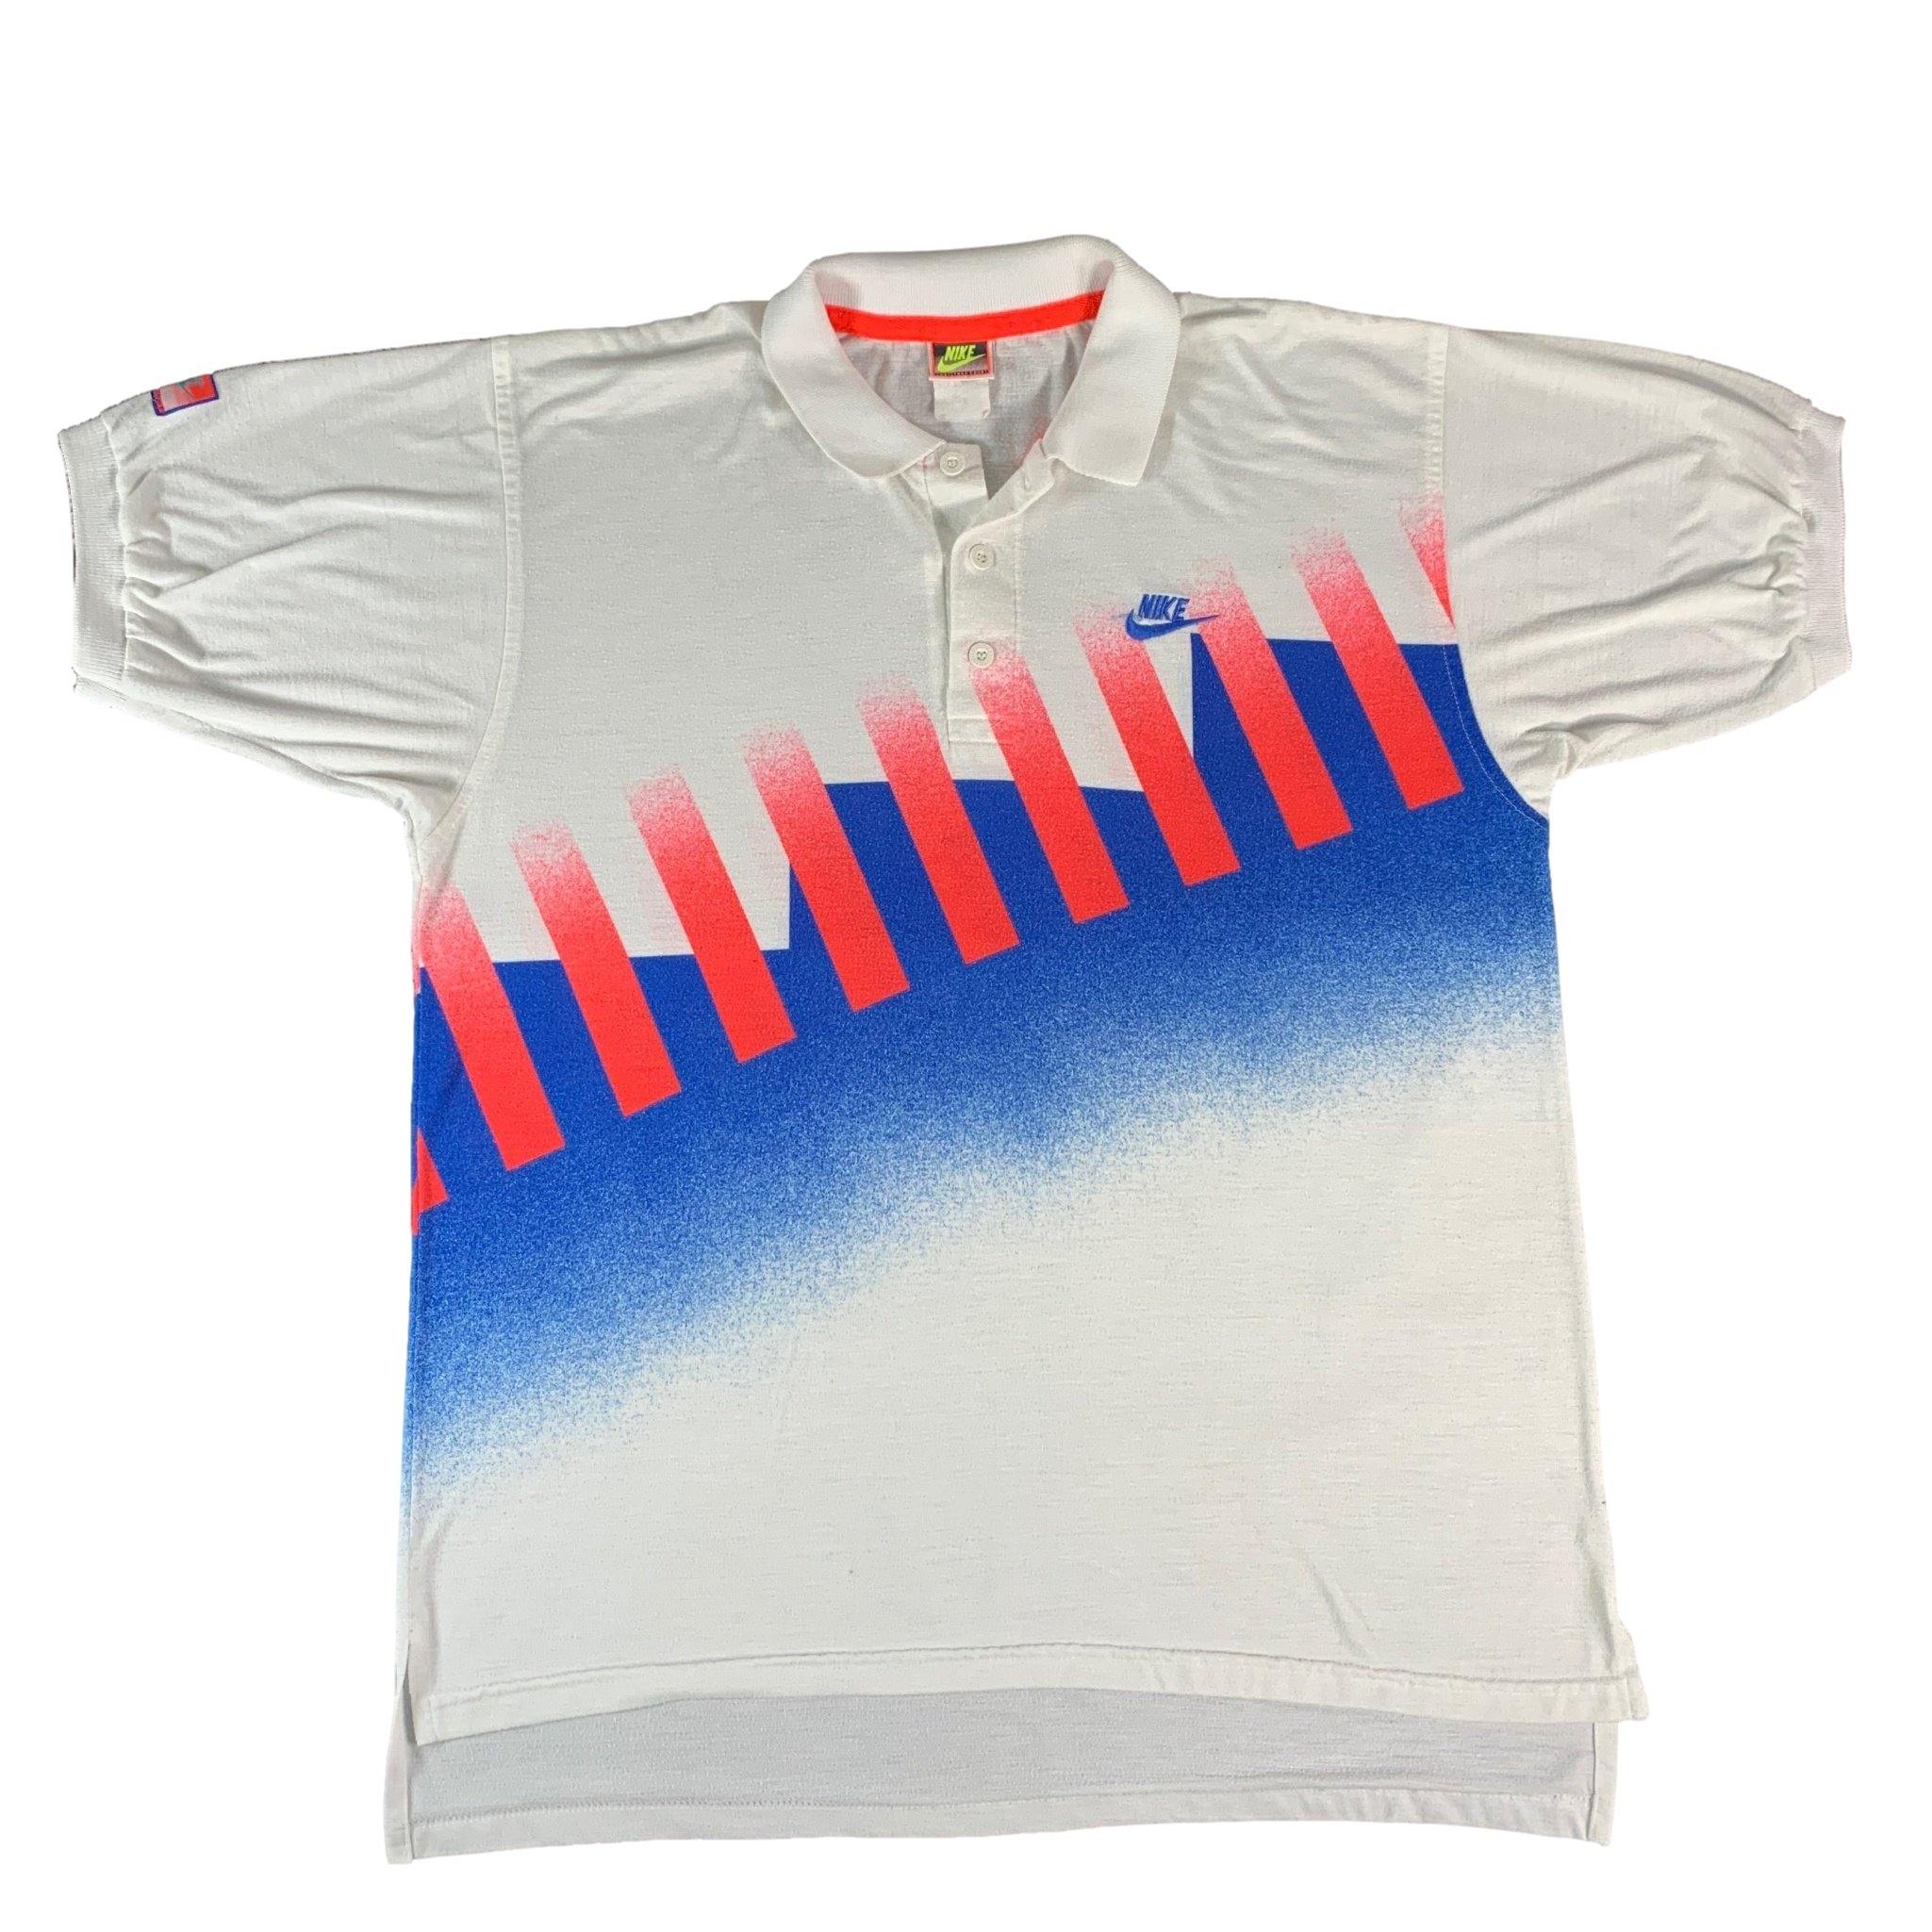 Challenge Court "Andre Agassi" Kit |